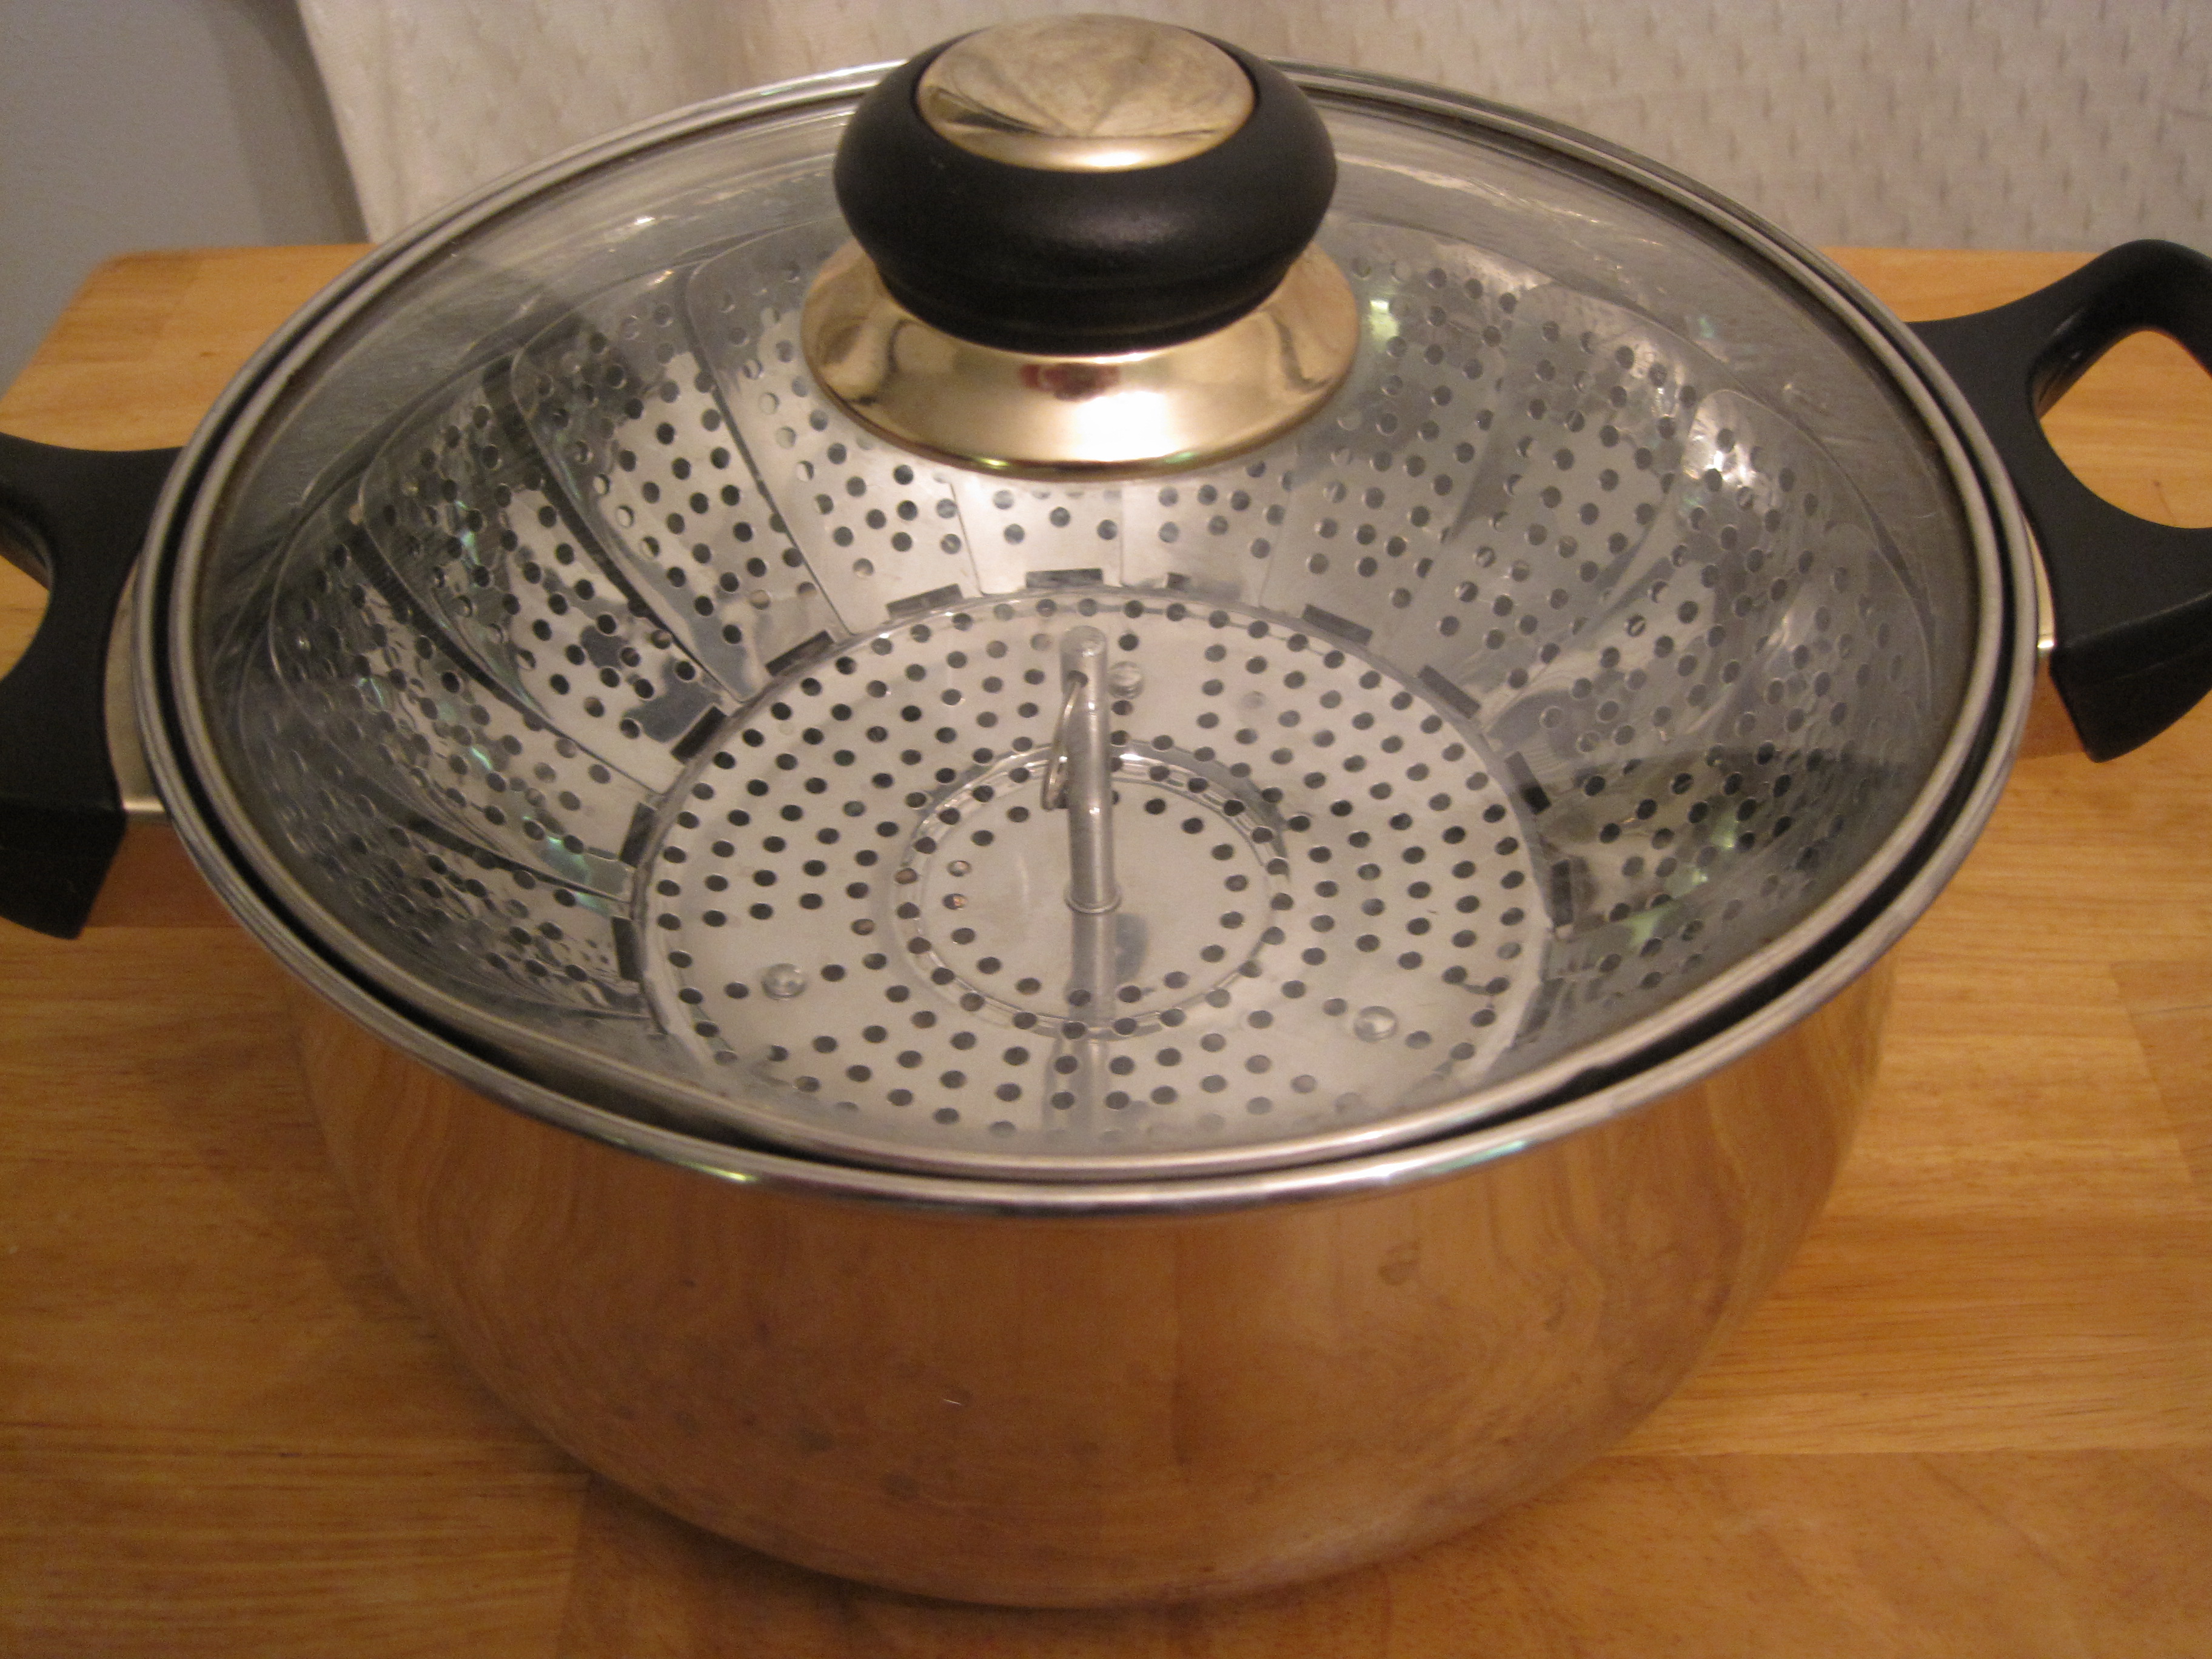 How do you use a stovetop food steamer to cook vegetables?